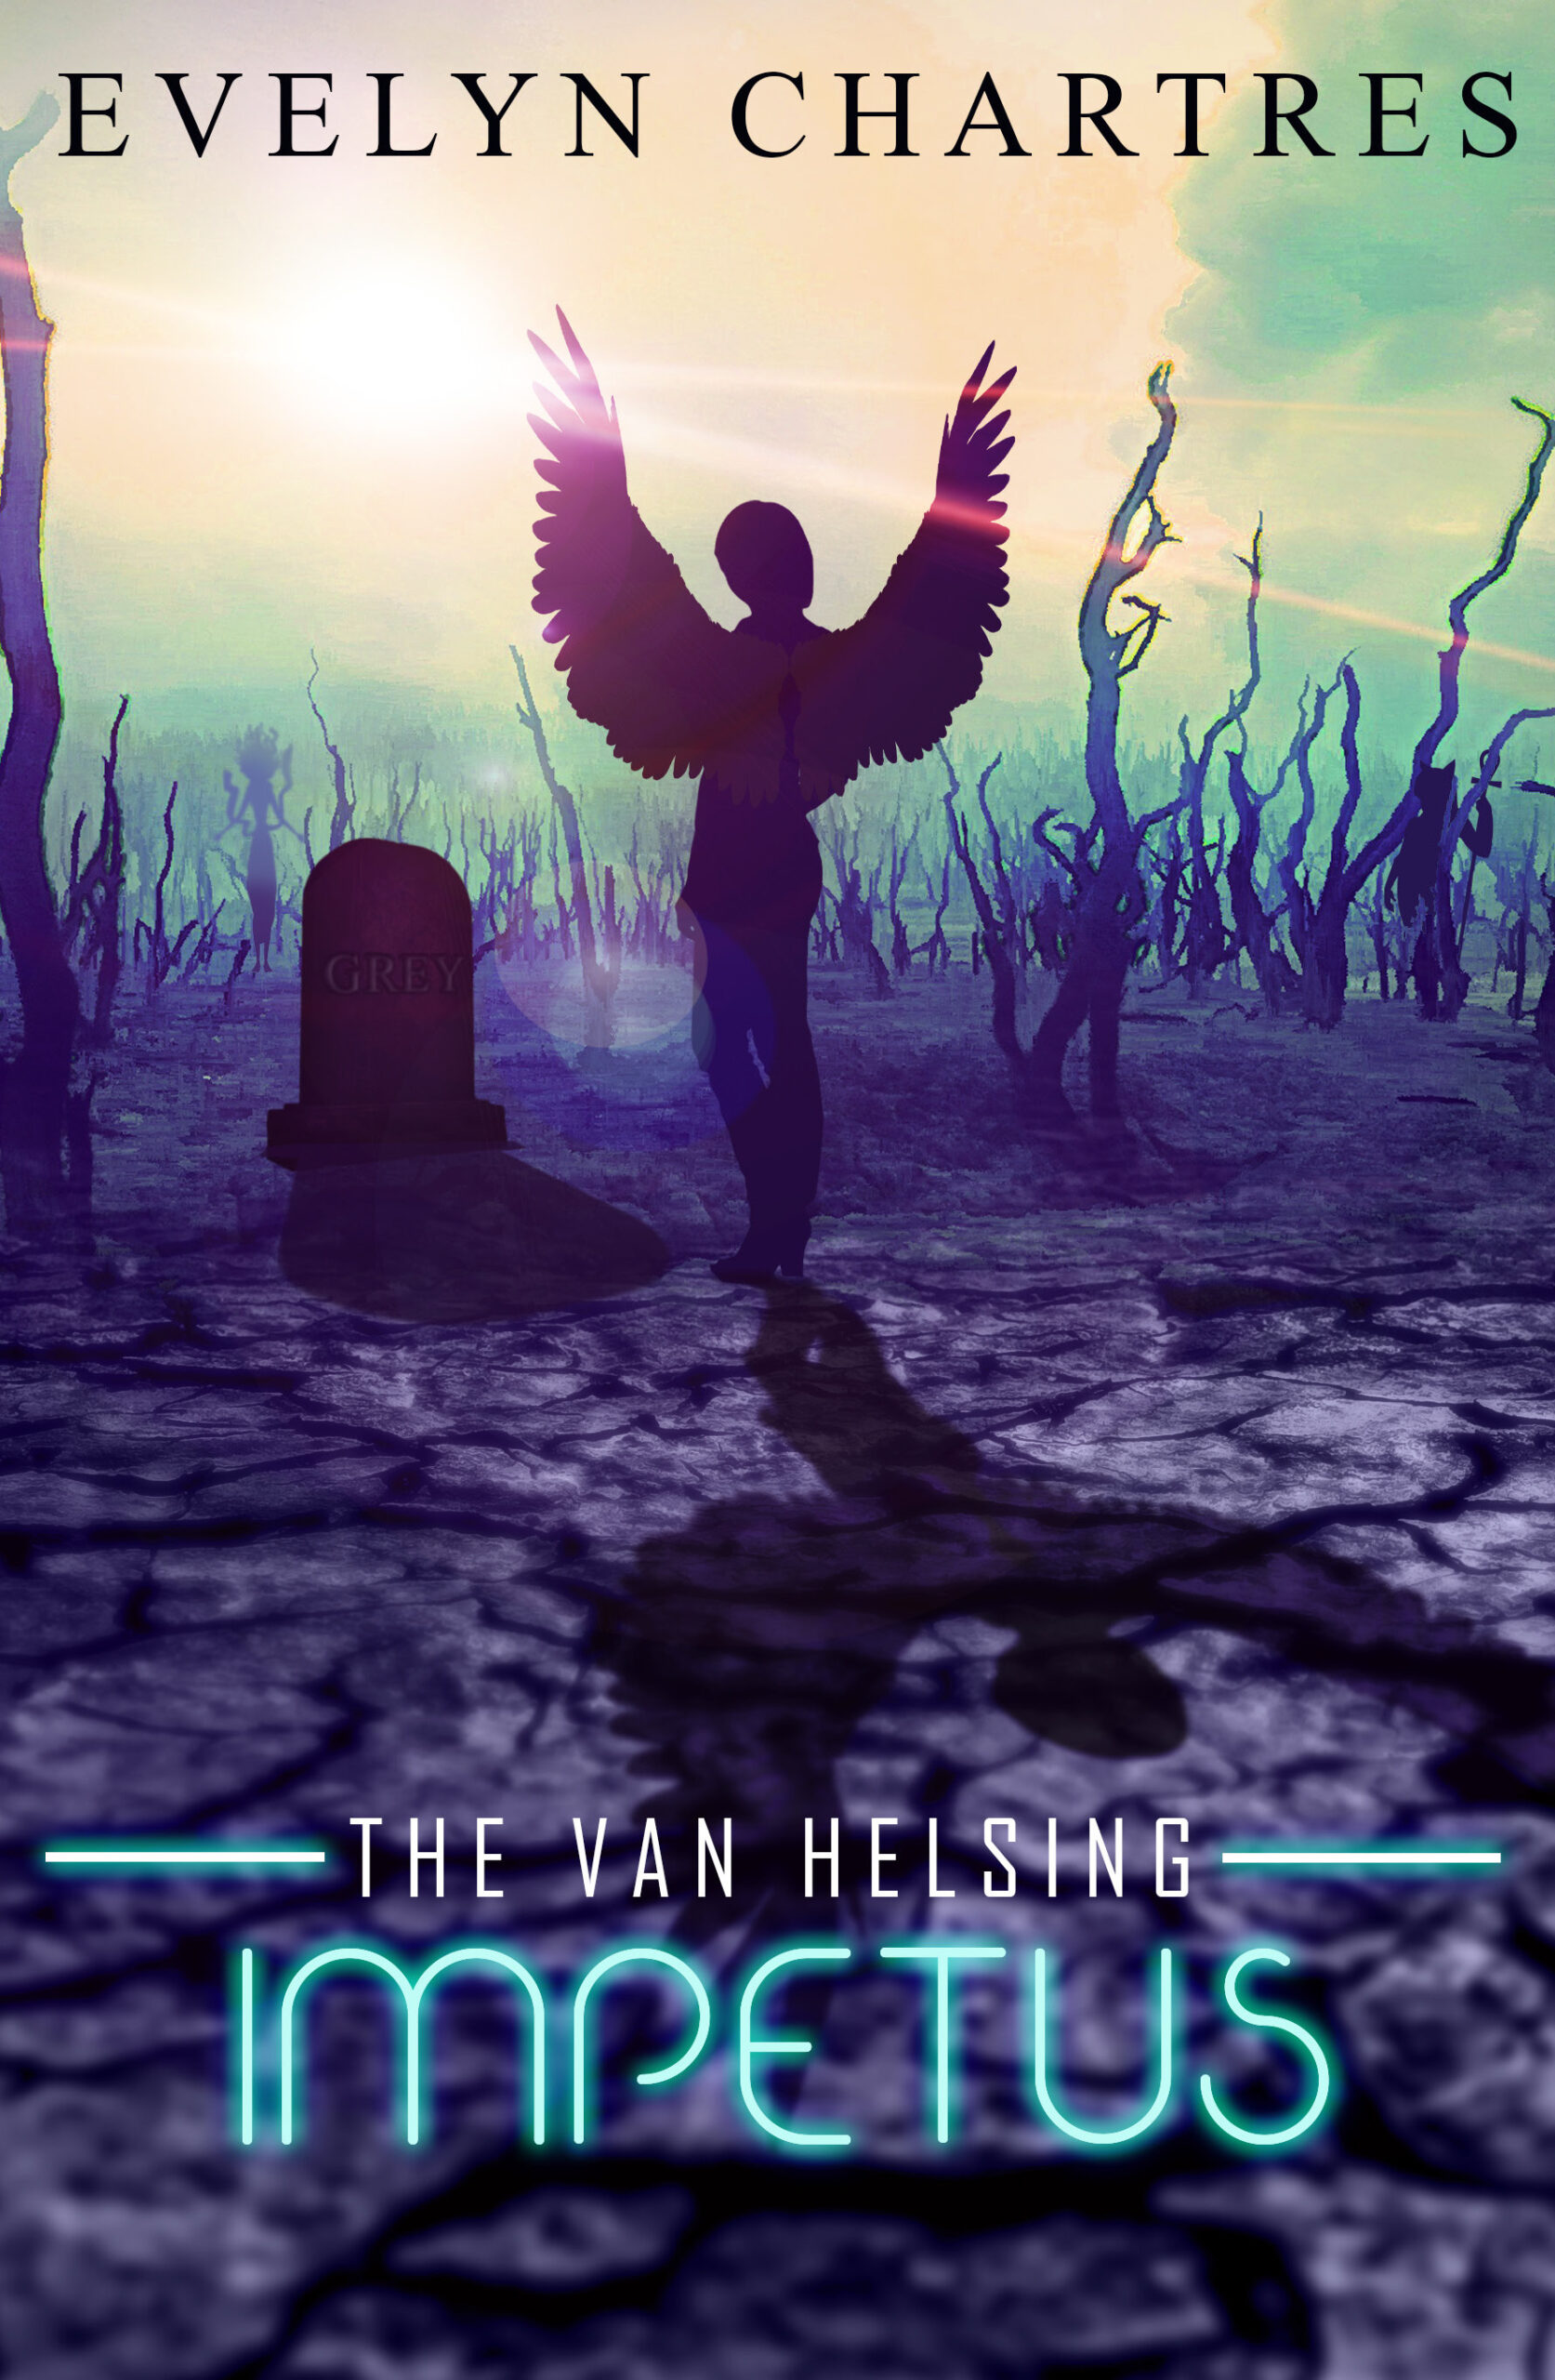 The Van Helsing Impetus by Evelyn Chartres